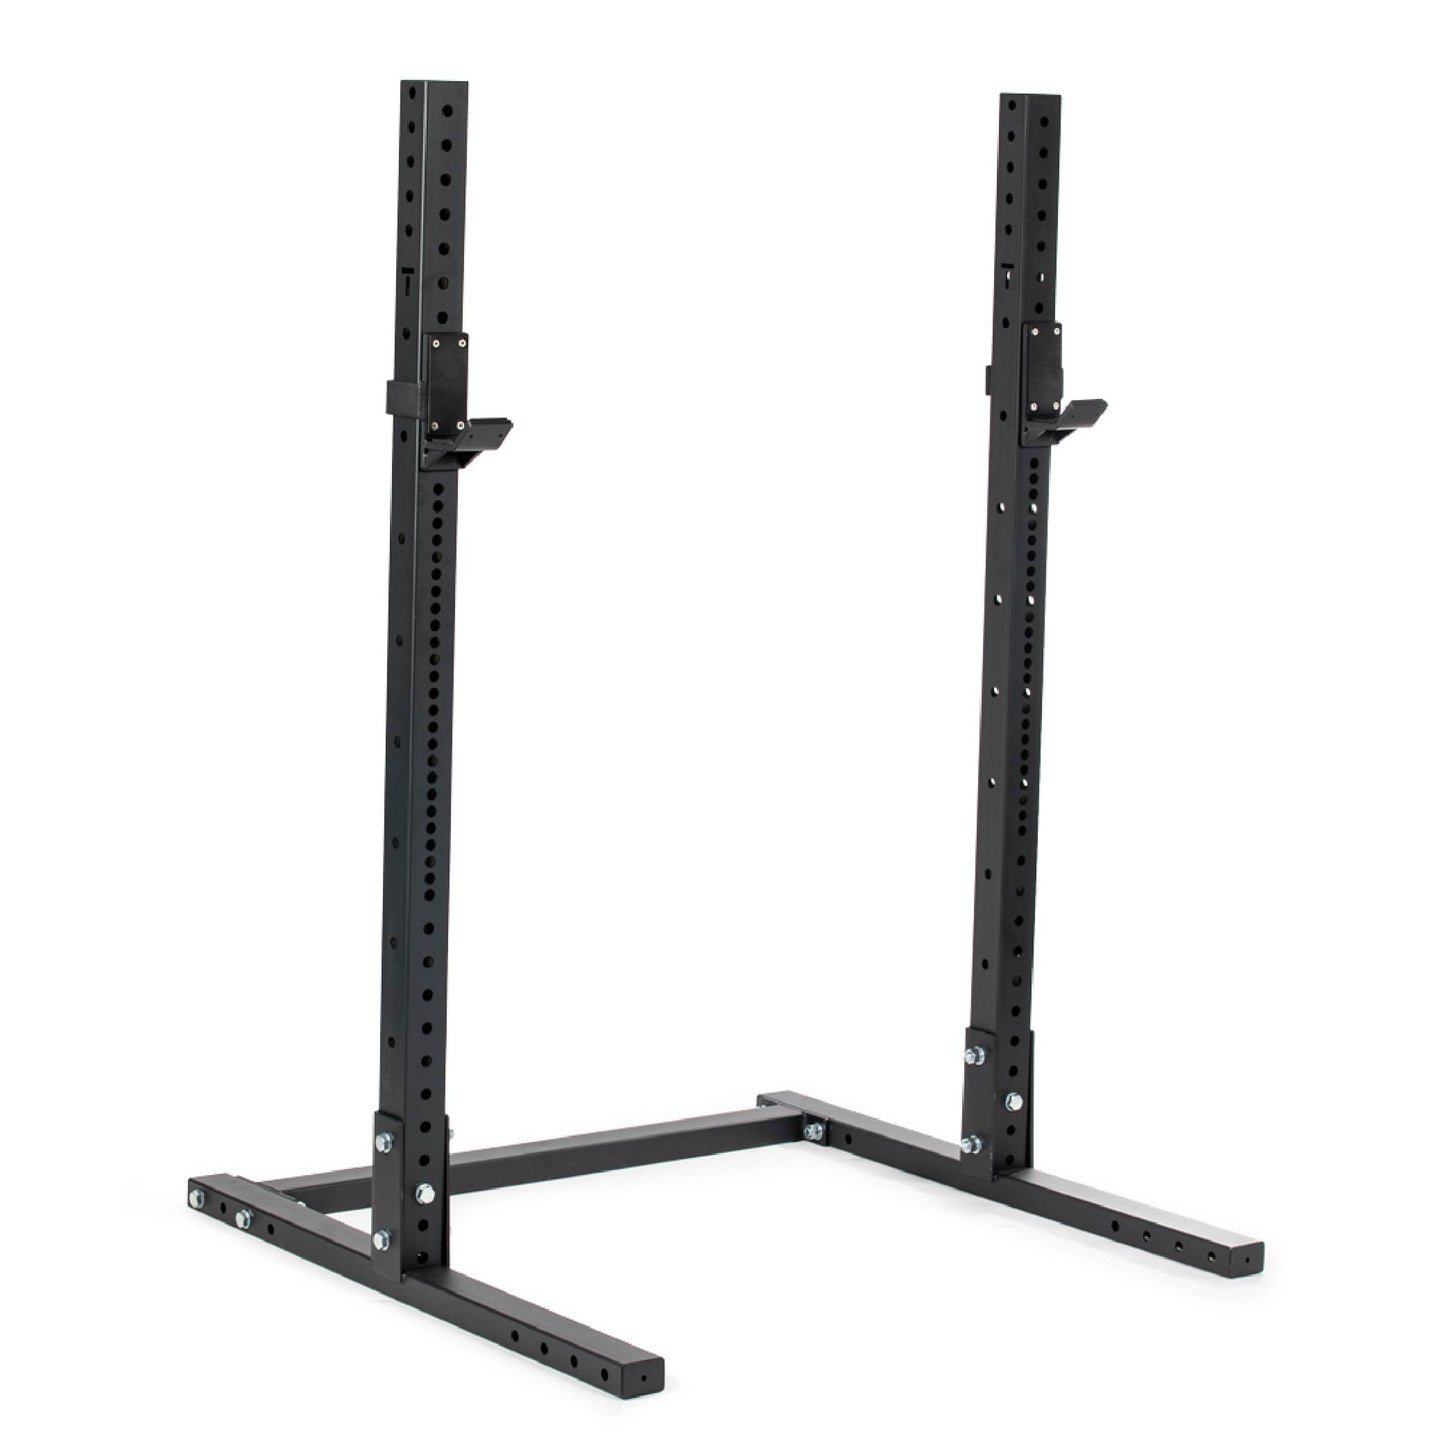 X-3 Series Short Squat Stand - view 1